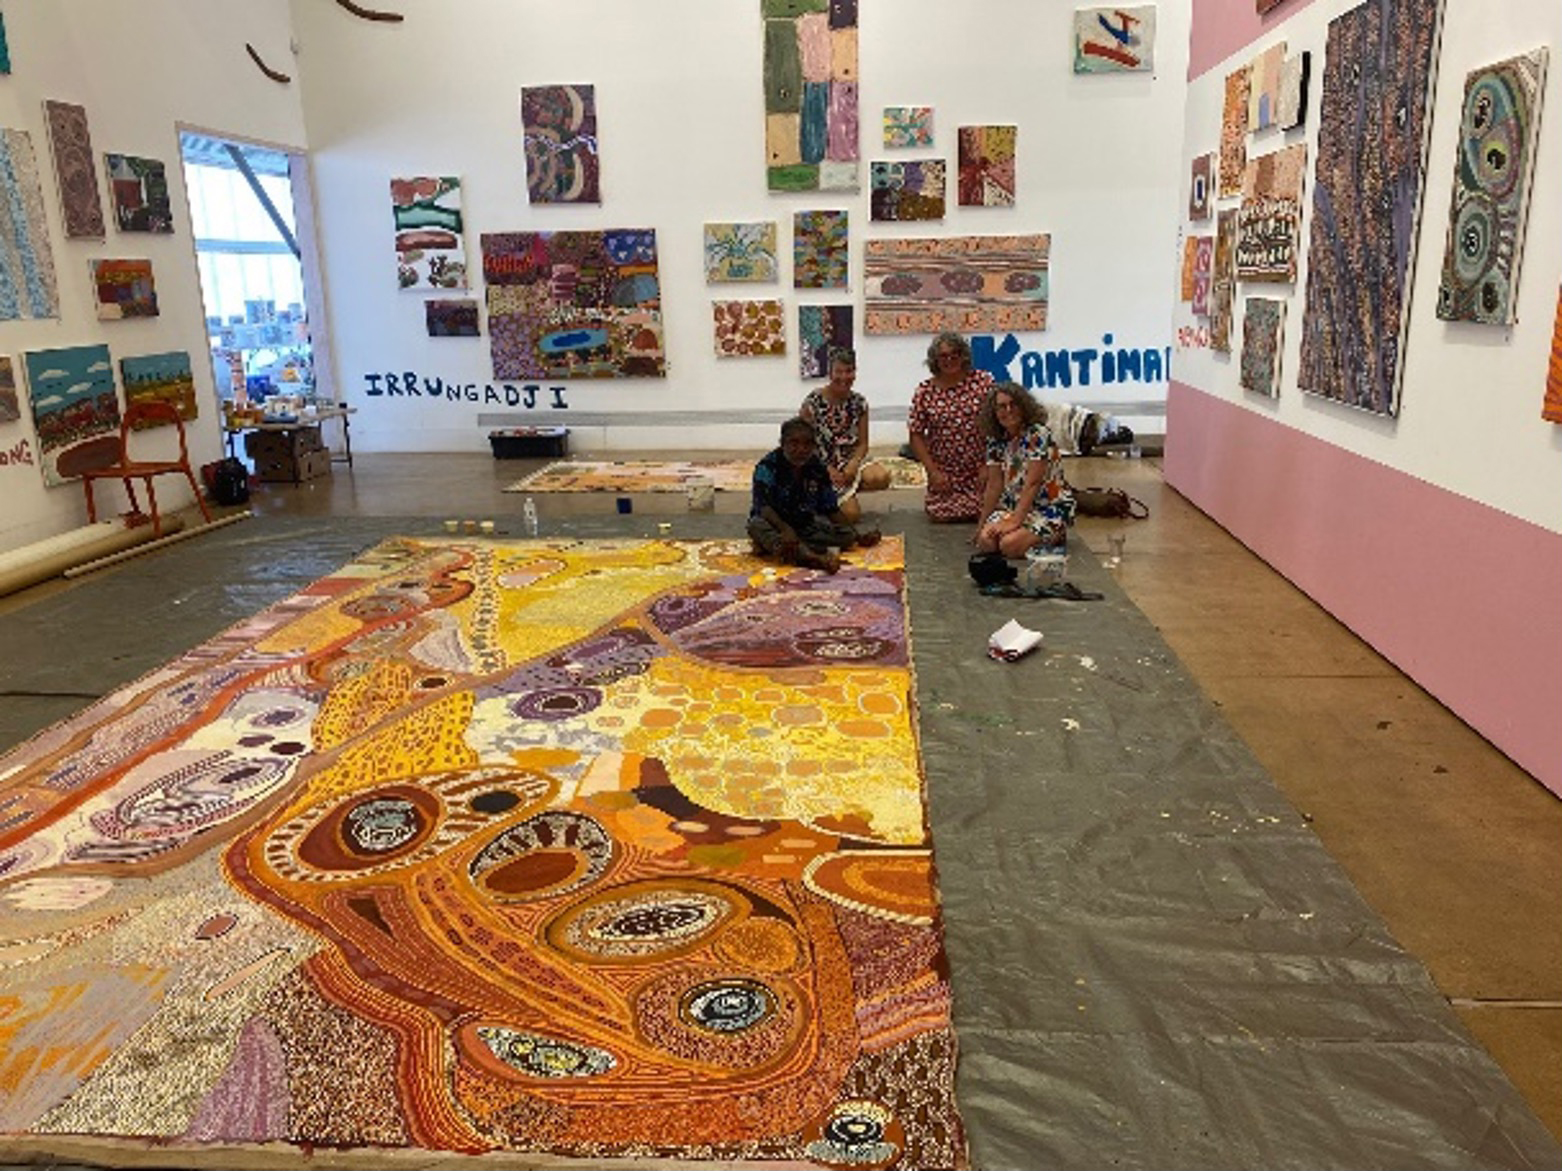 Four people sitting on the floor of an art gallery behind a large aboriginal painting